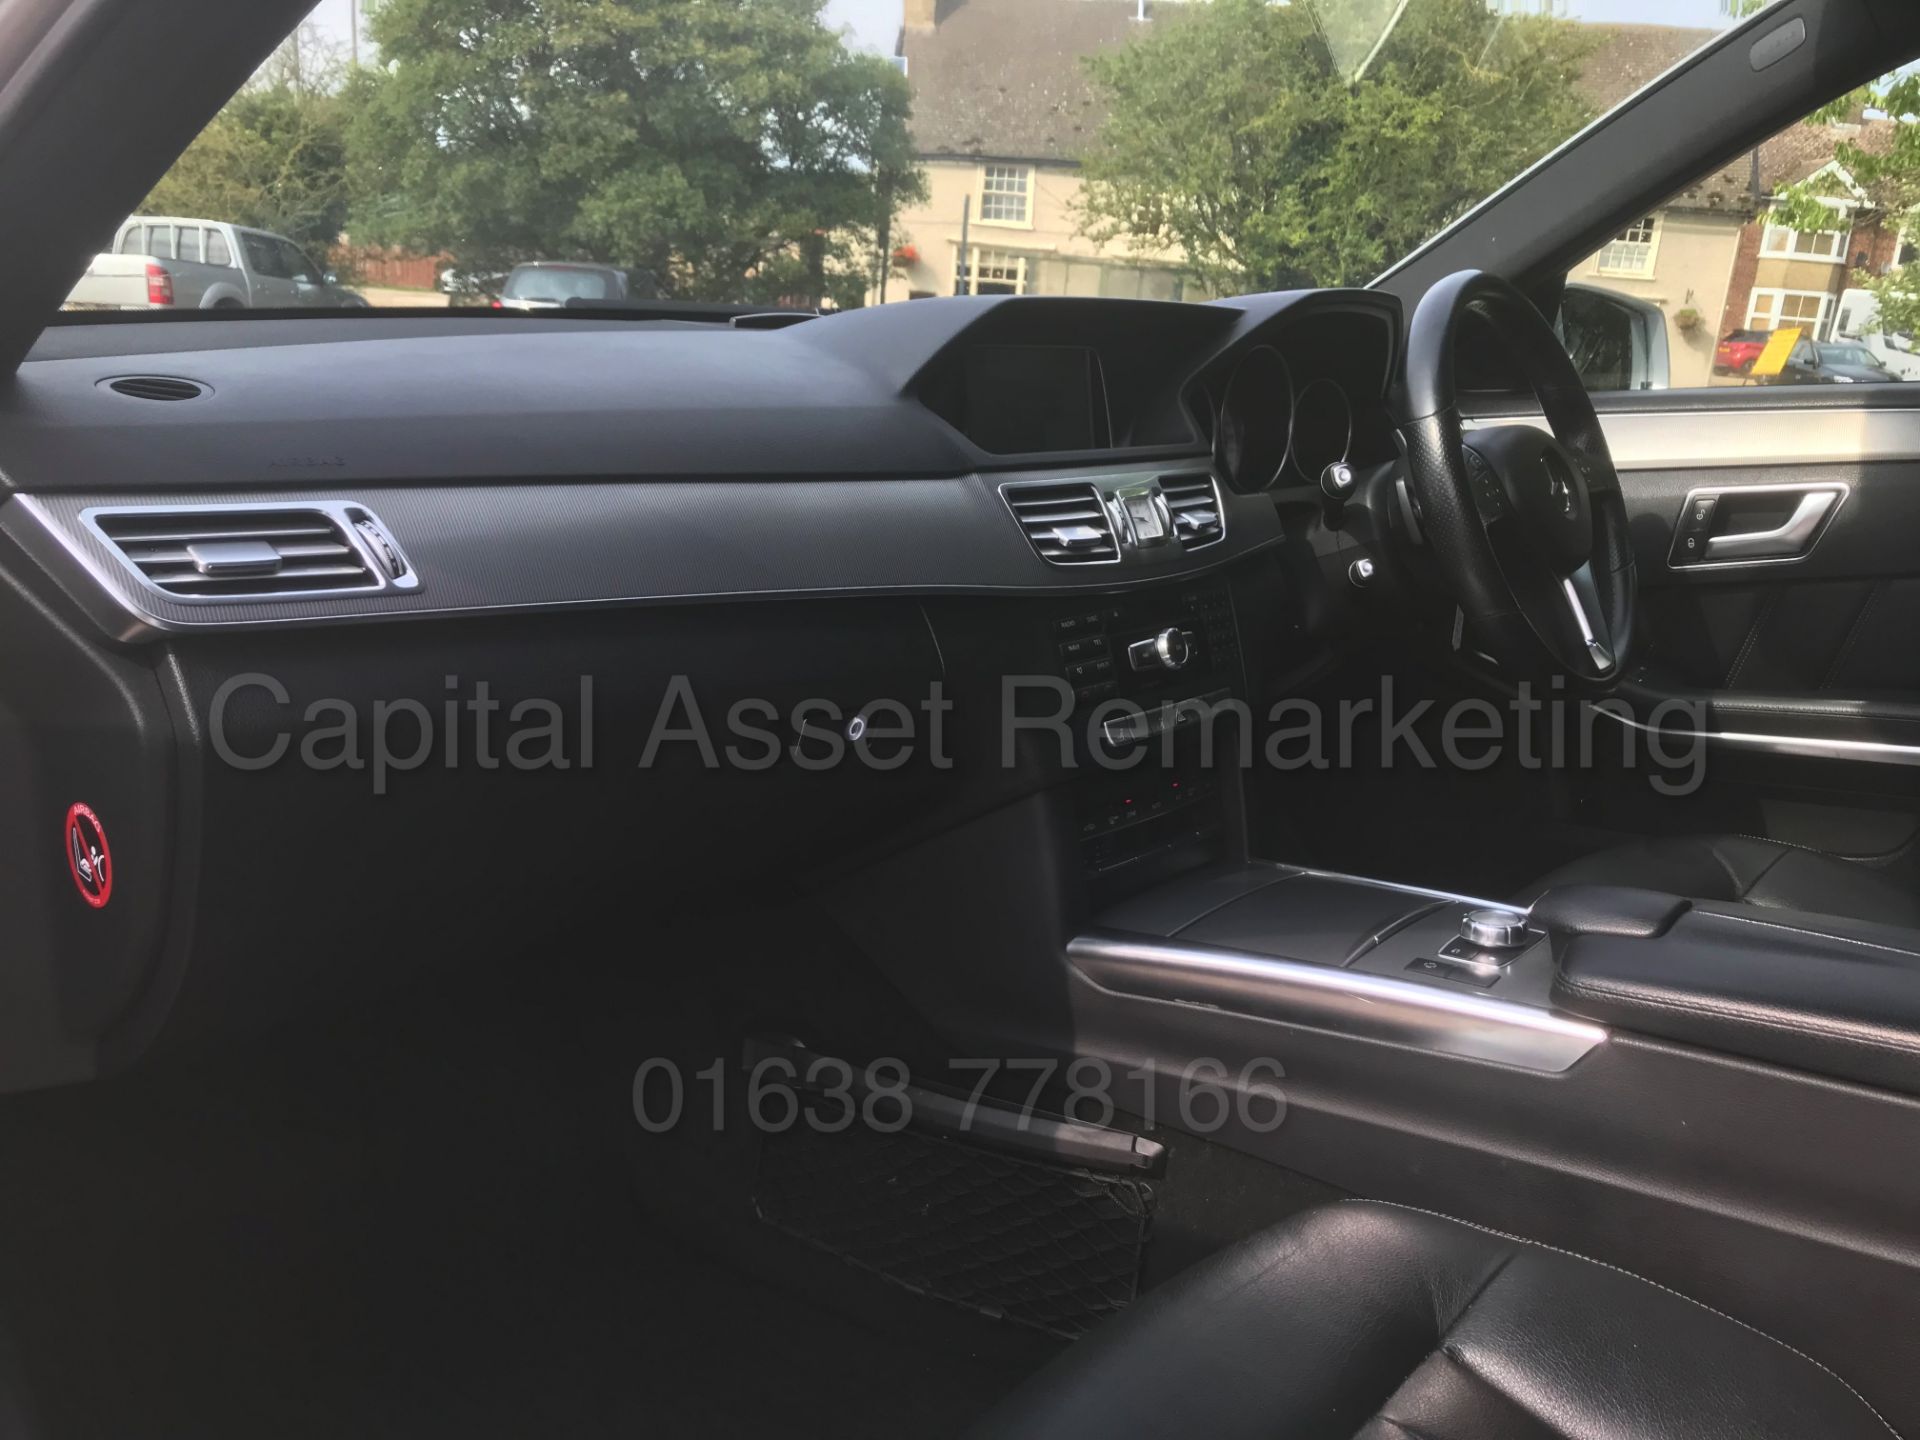 (On Sale) MERCEDES-BENZ E220 CDI *SALOON* (2013 - NEW MODEL) '7G TRONIC AUTO - LEATHER - SAT NAV' - Image 16 of 39